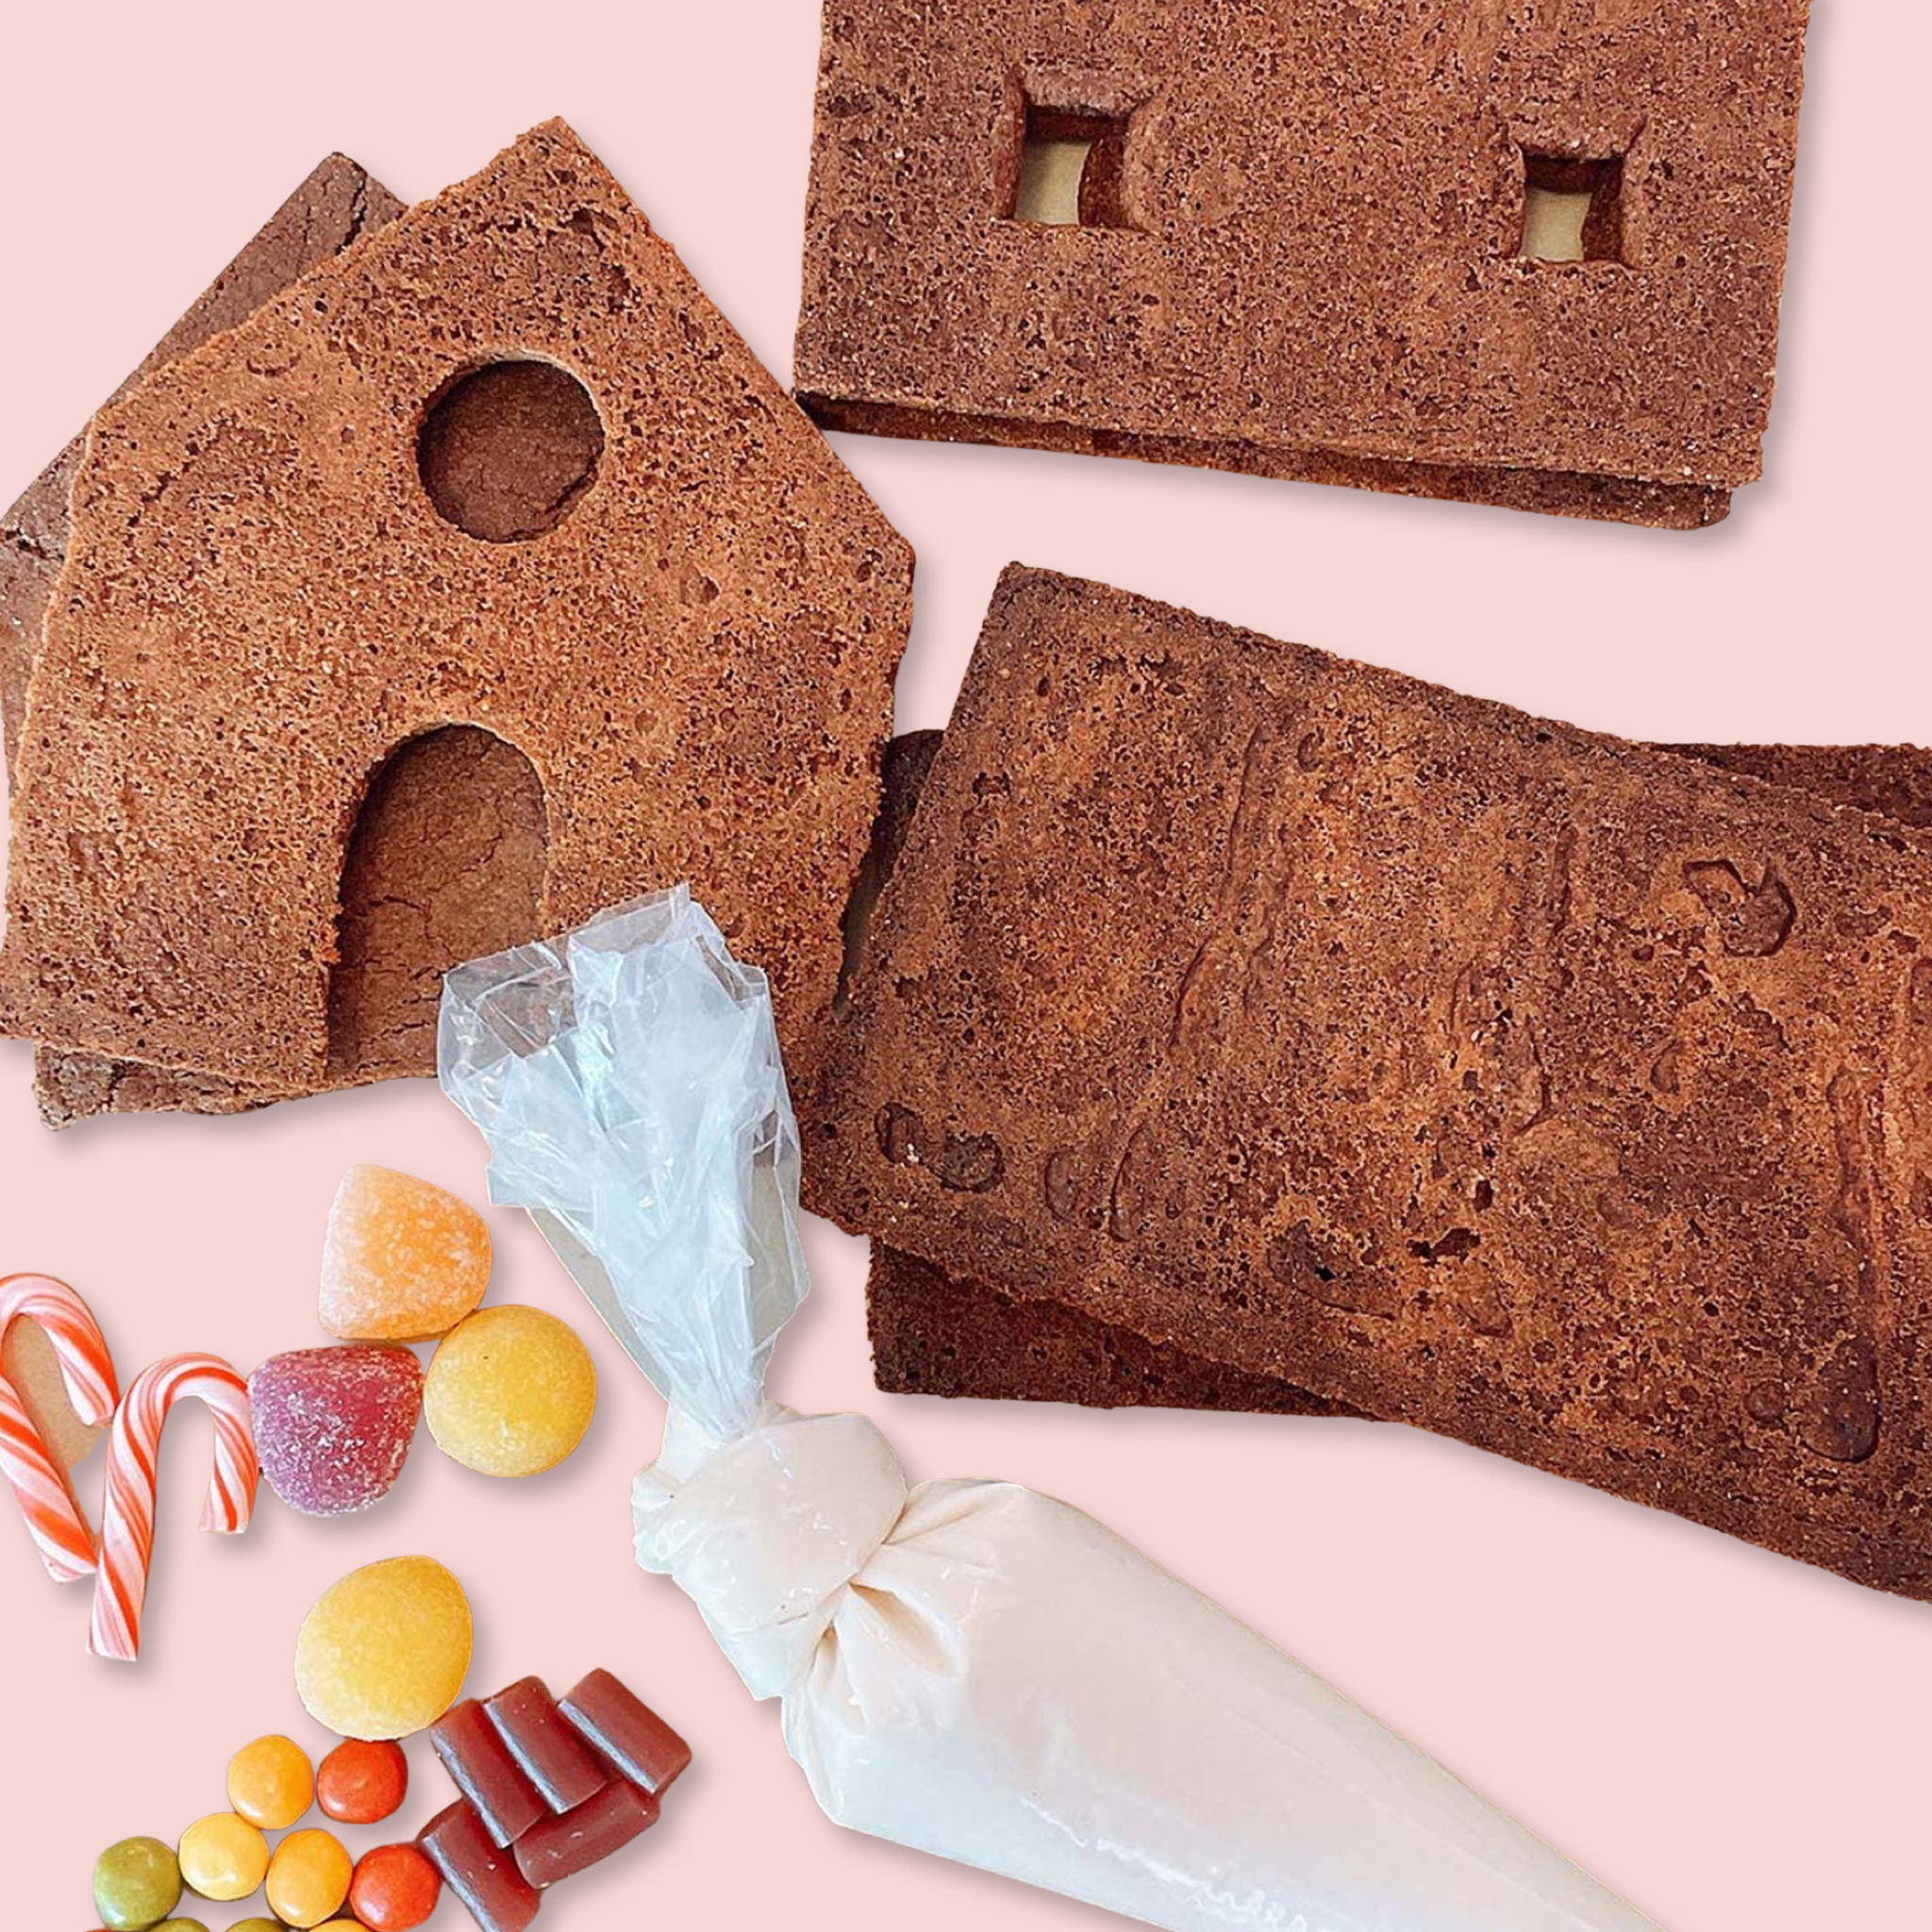 A DIY Gingerbread House Kit – HomeStyle Bakery